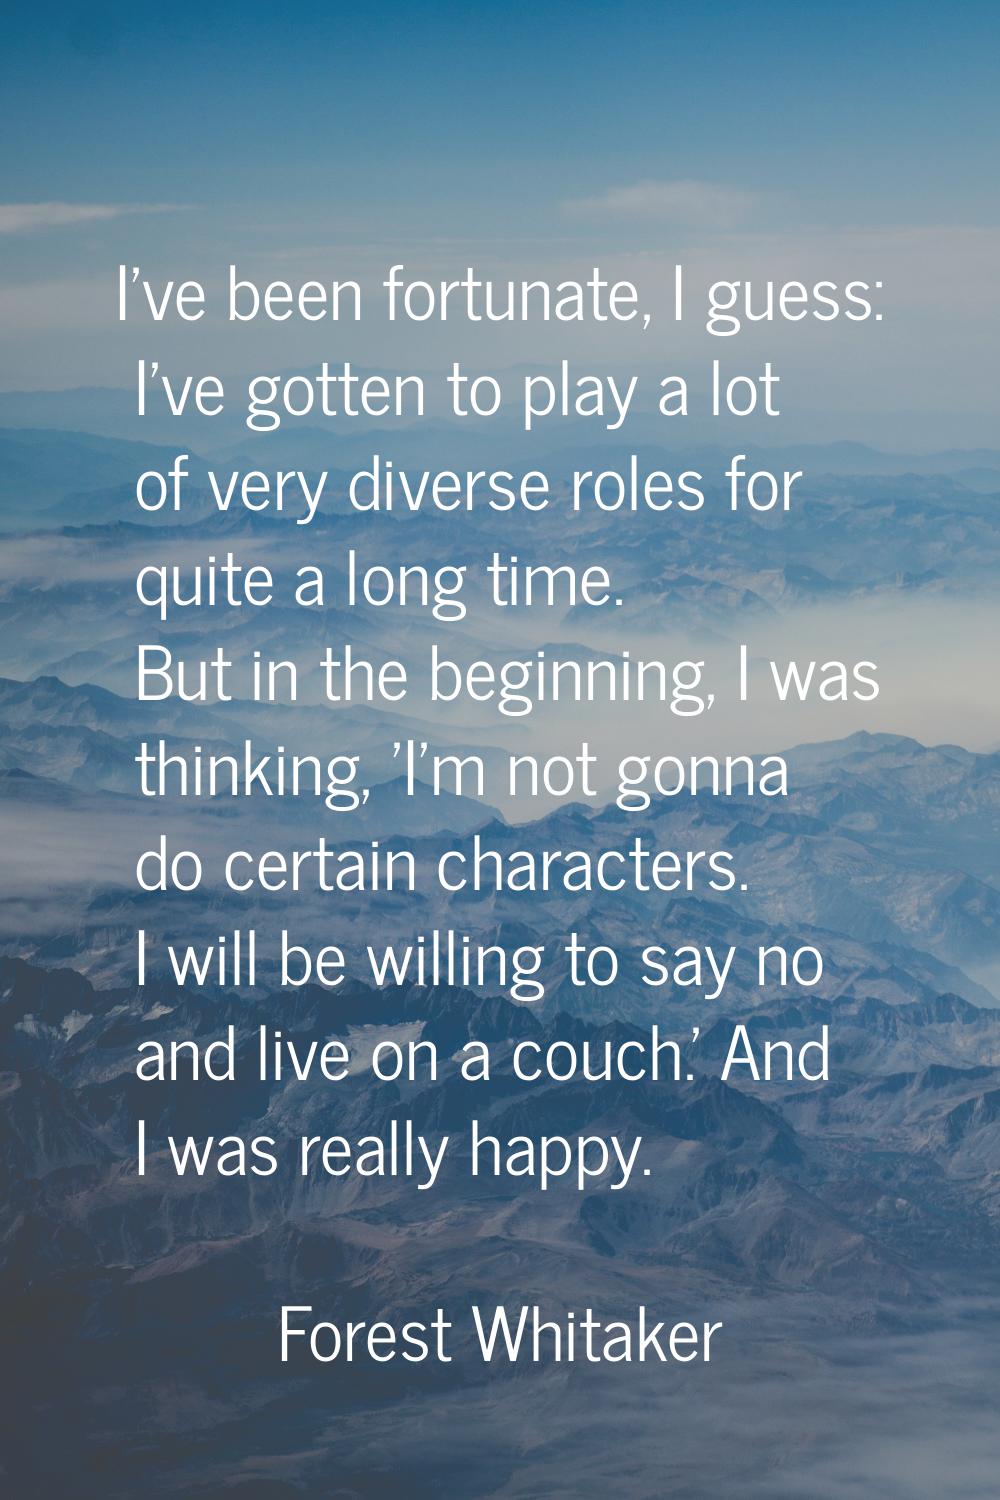 I've been fortunate, I guess: I've gotten to play a lot of very diverse roles for quite a long time